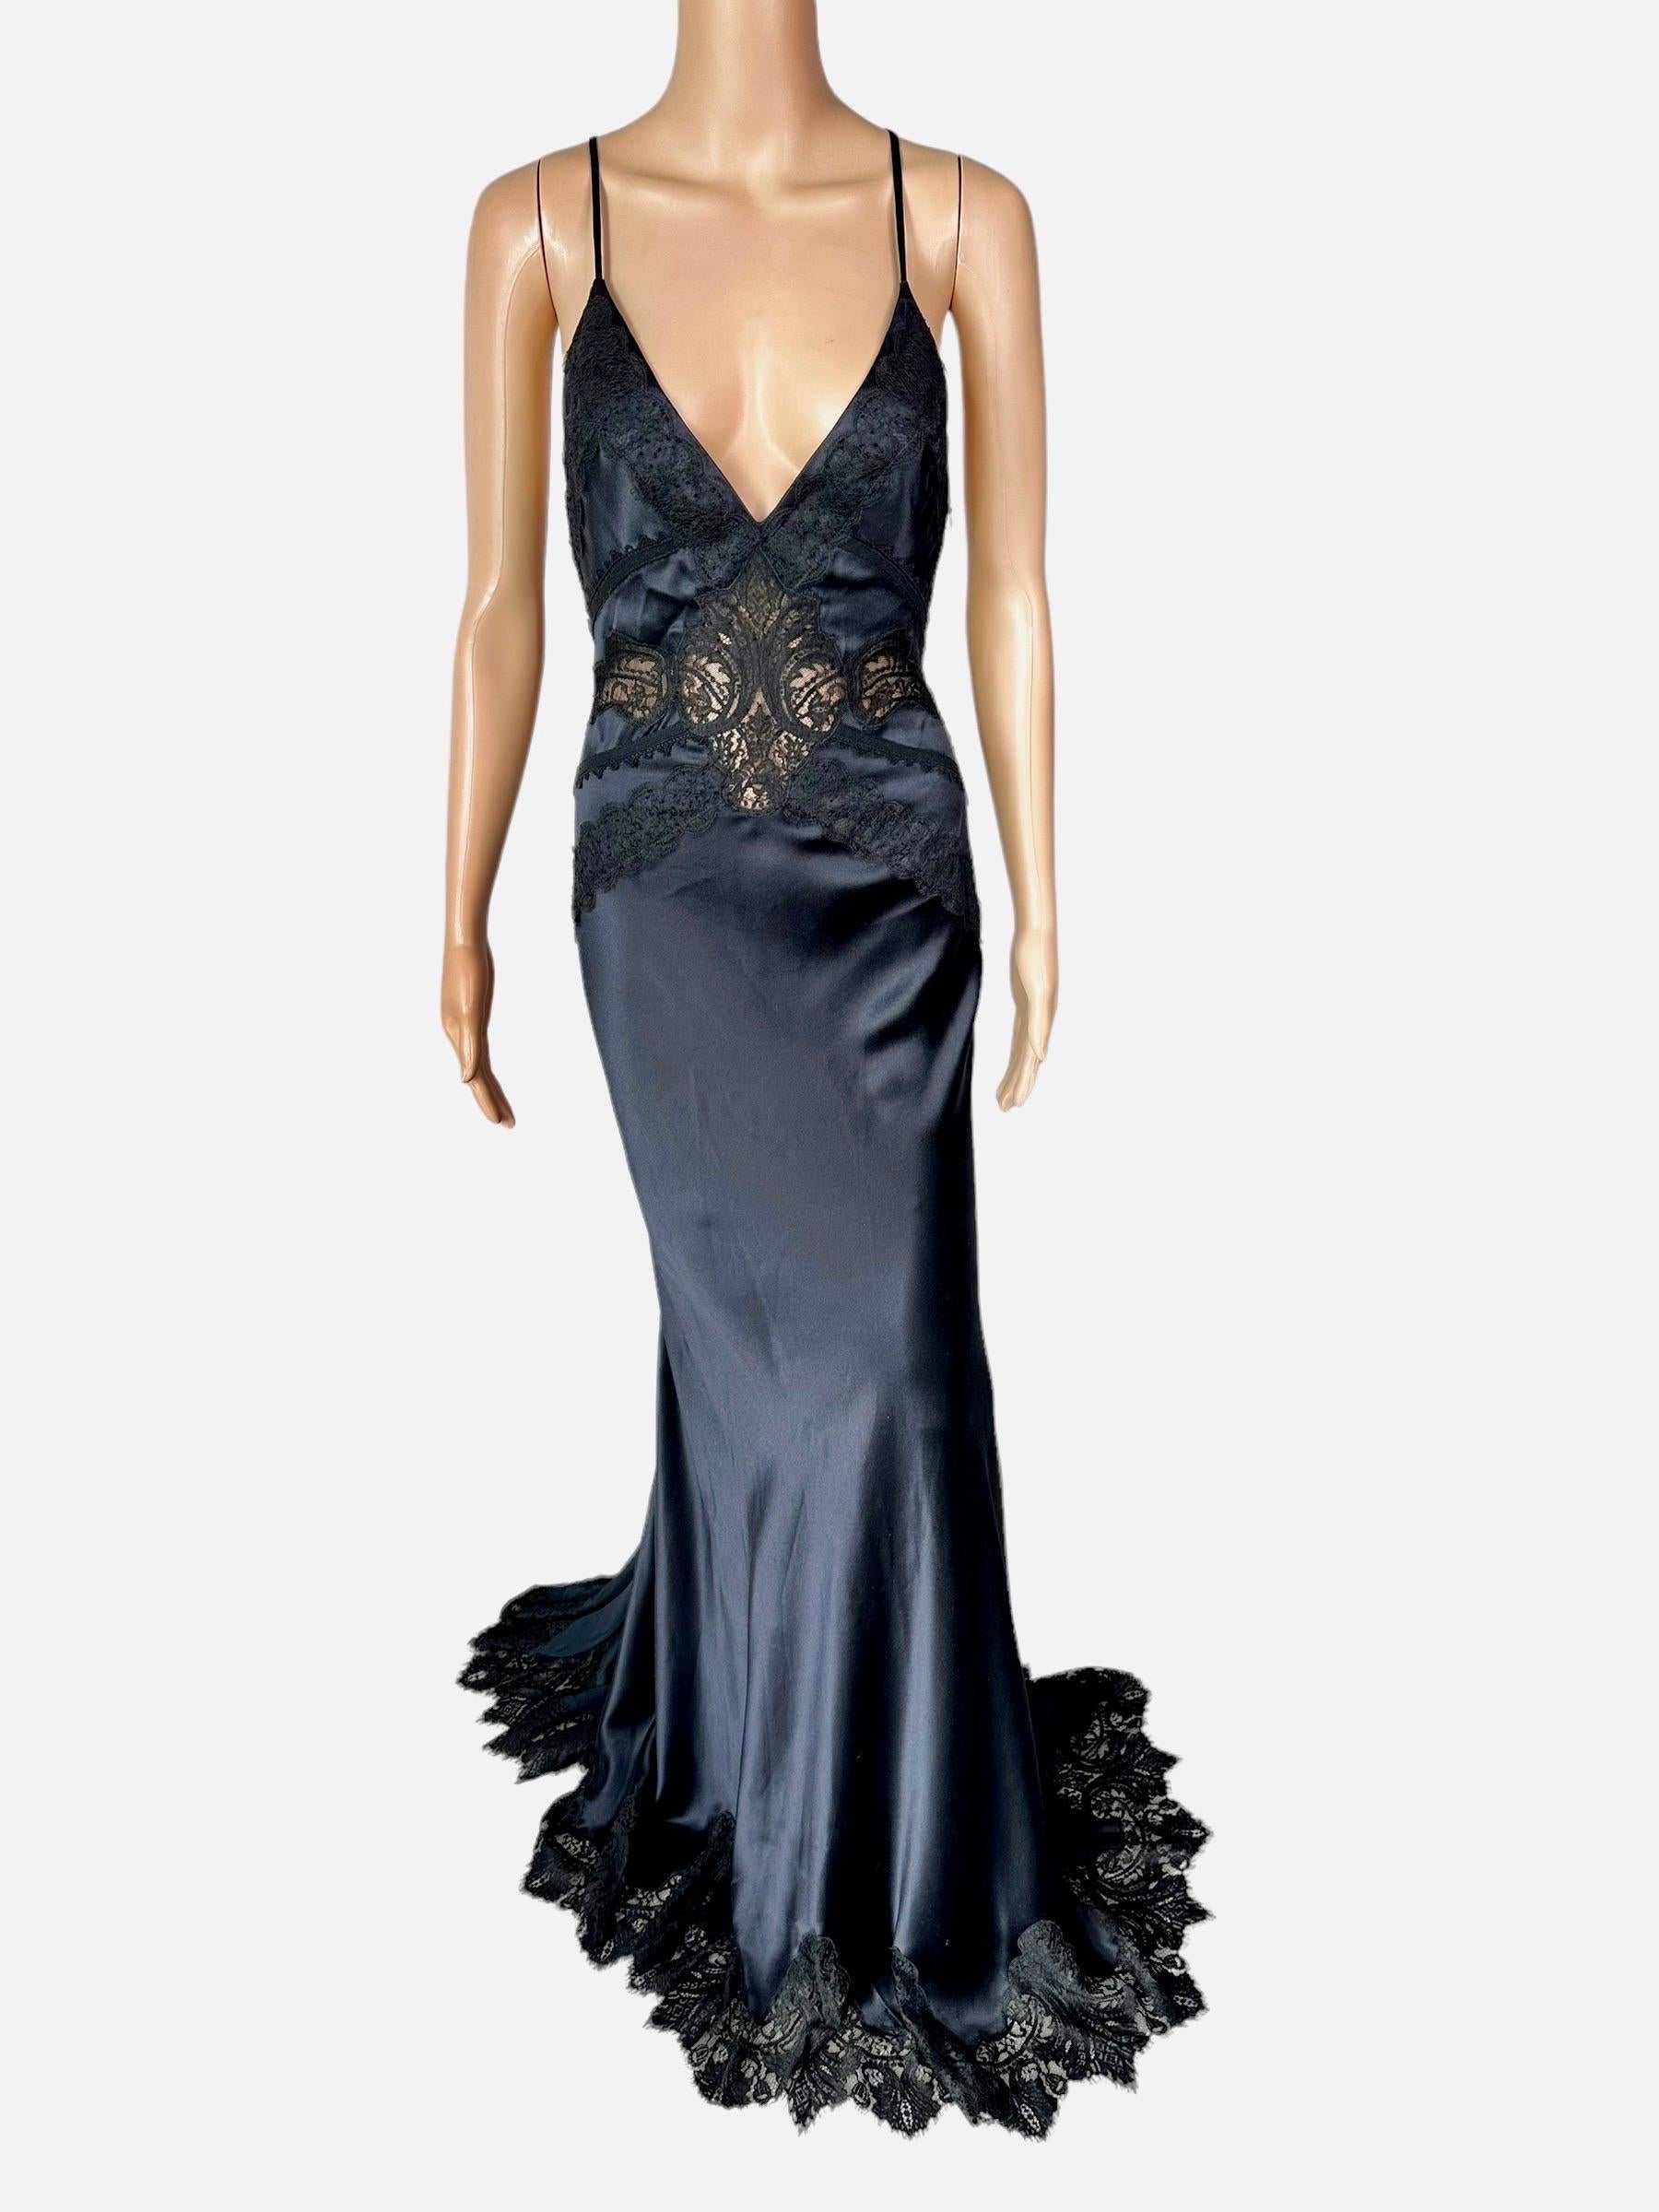 Versace c.2006 Plunging Neckline Sheer Lace Panels Backless Evening Dress Gown  For Sale 4